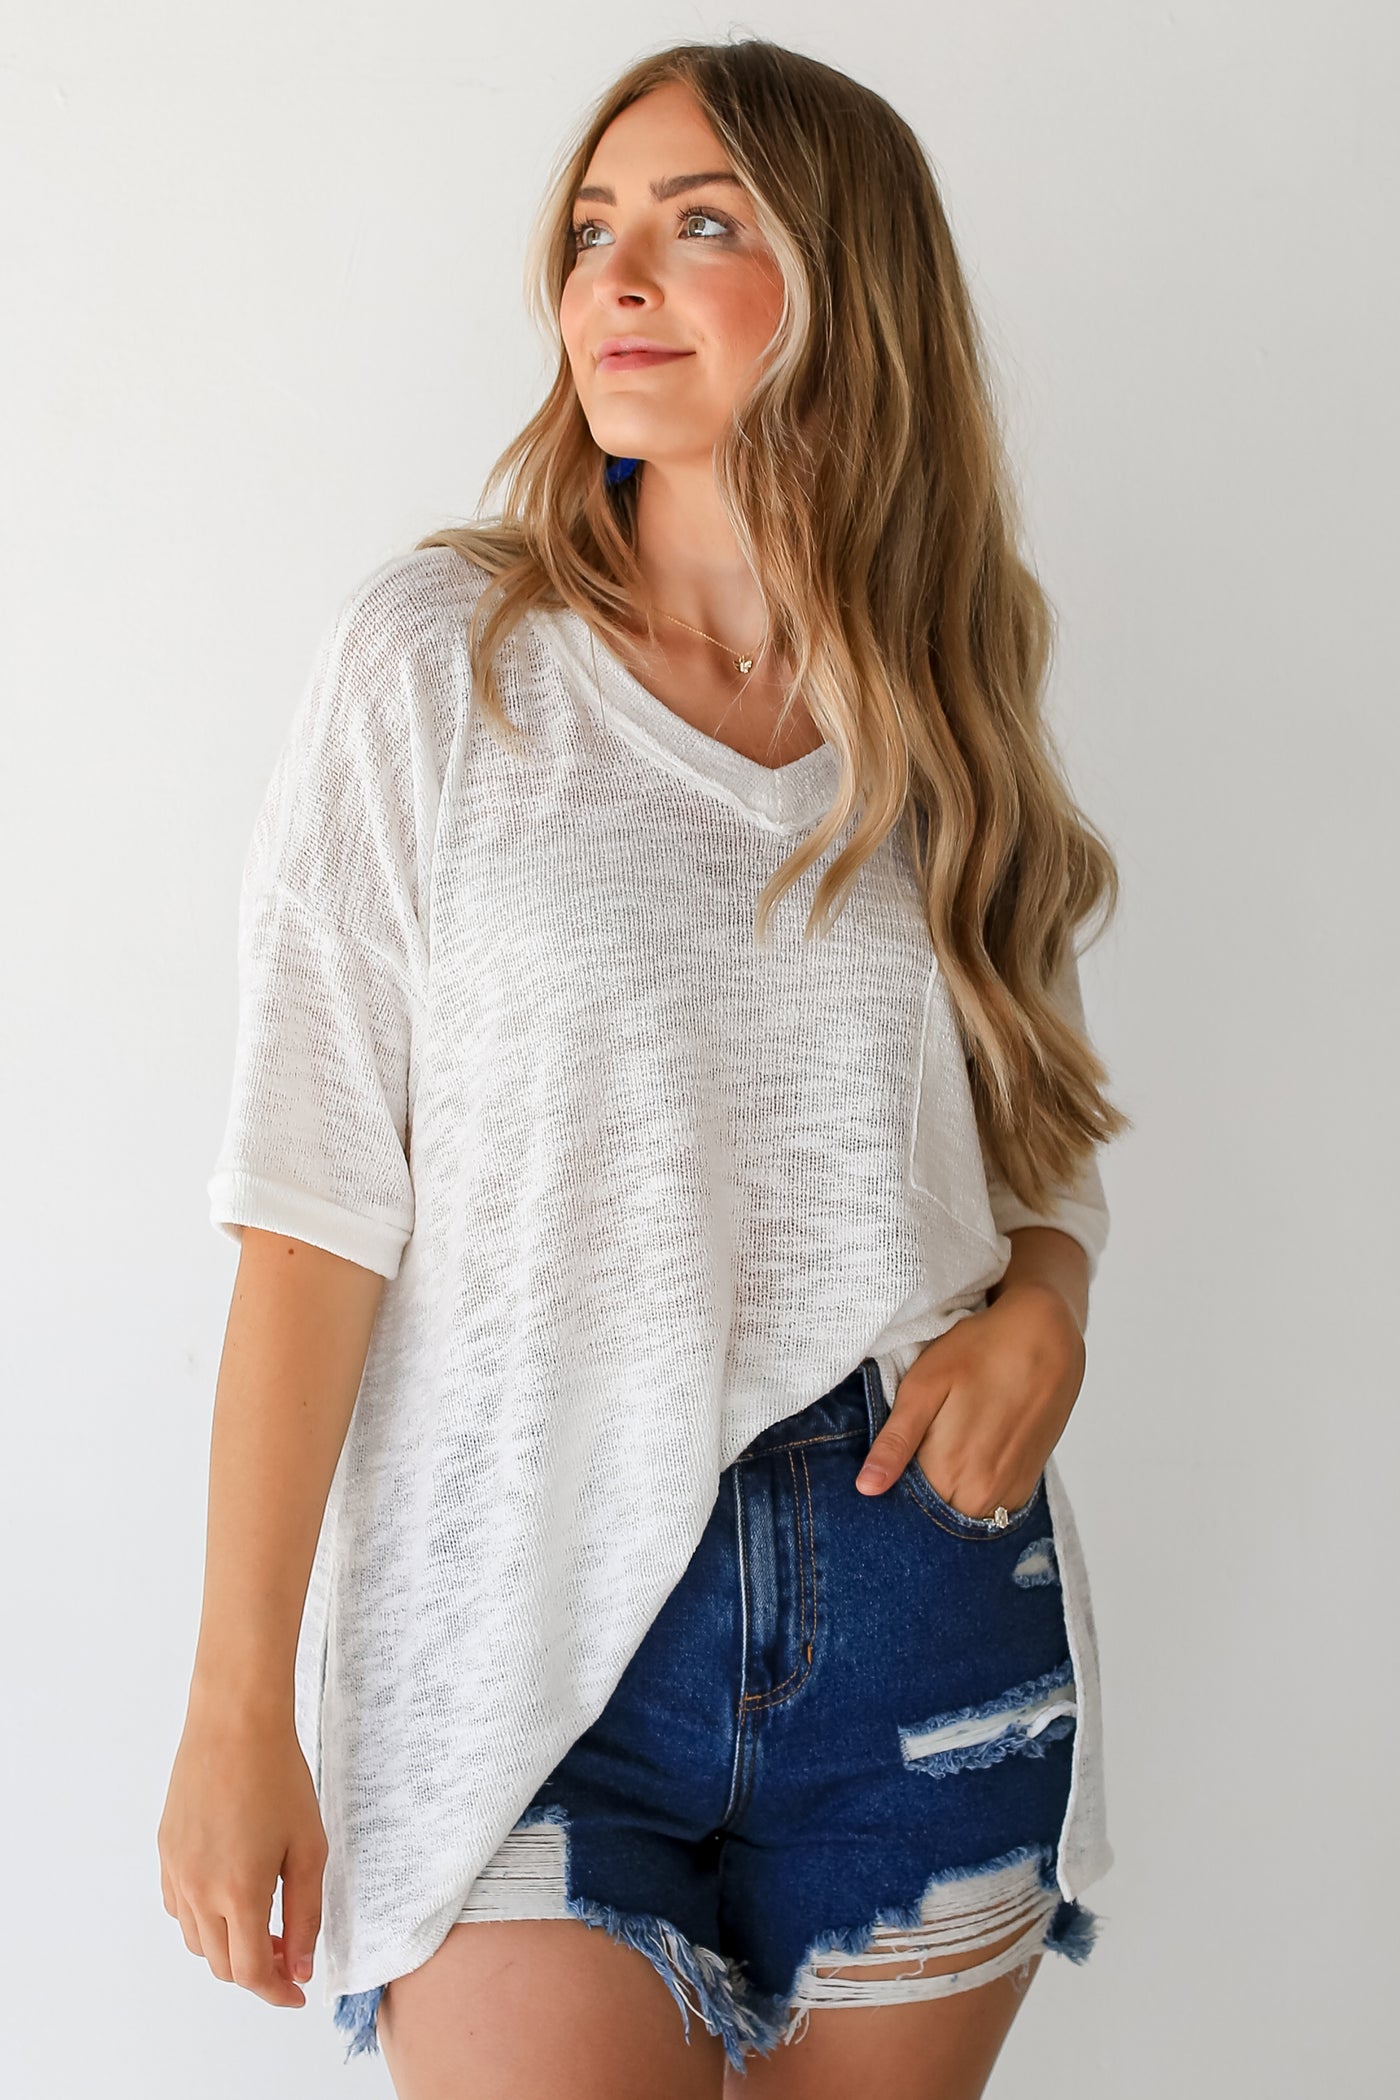 white Knit Top tucked in